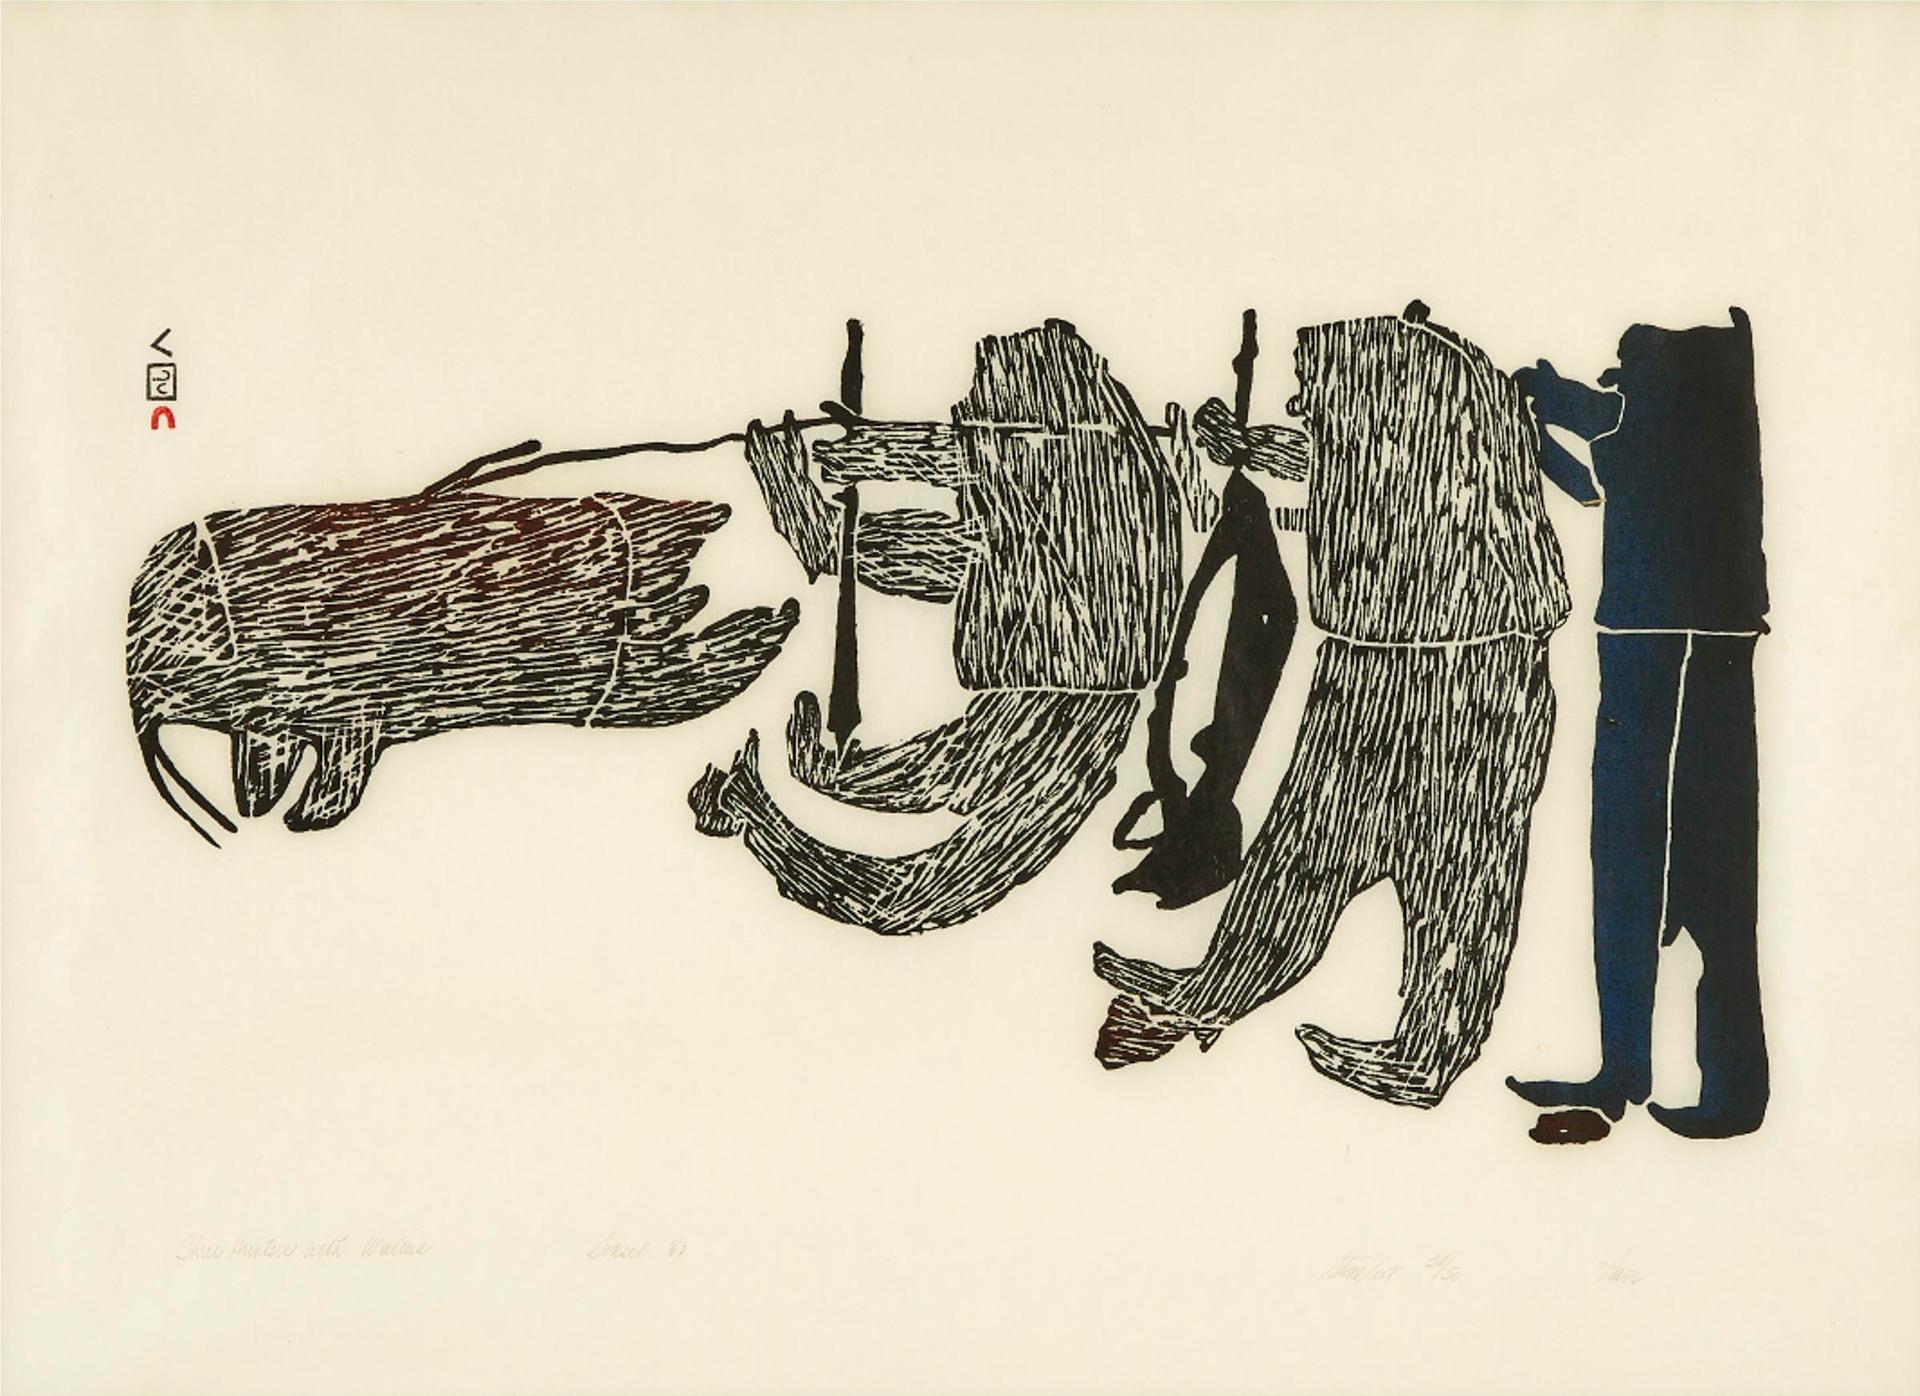 Parr (1893-1969) - Three Hunters With Walrus, 1967